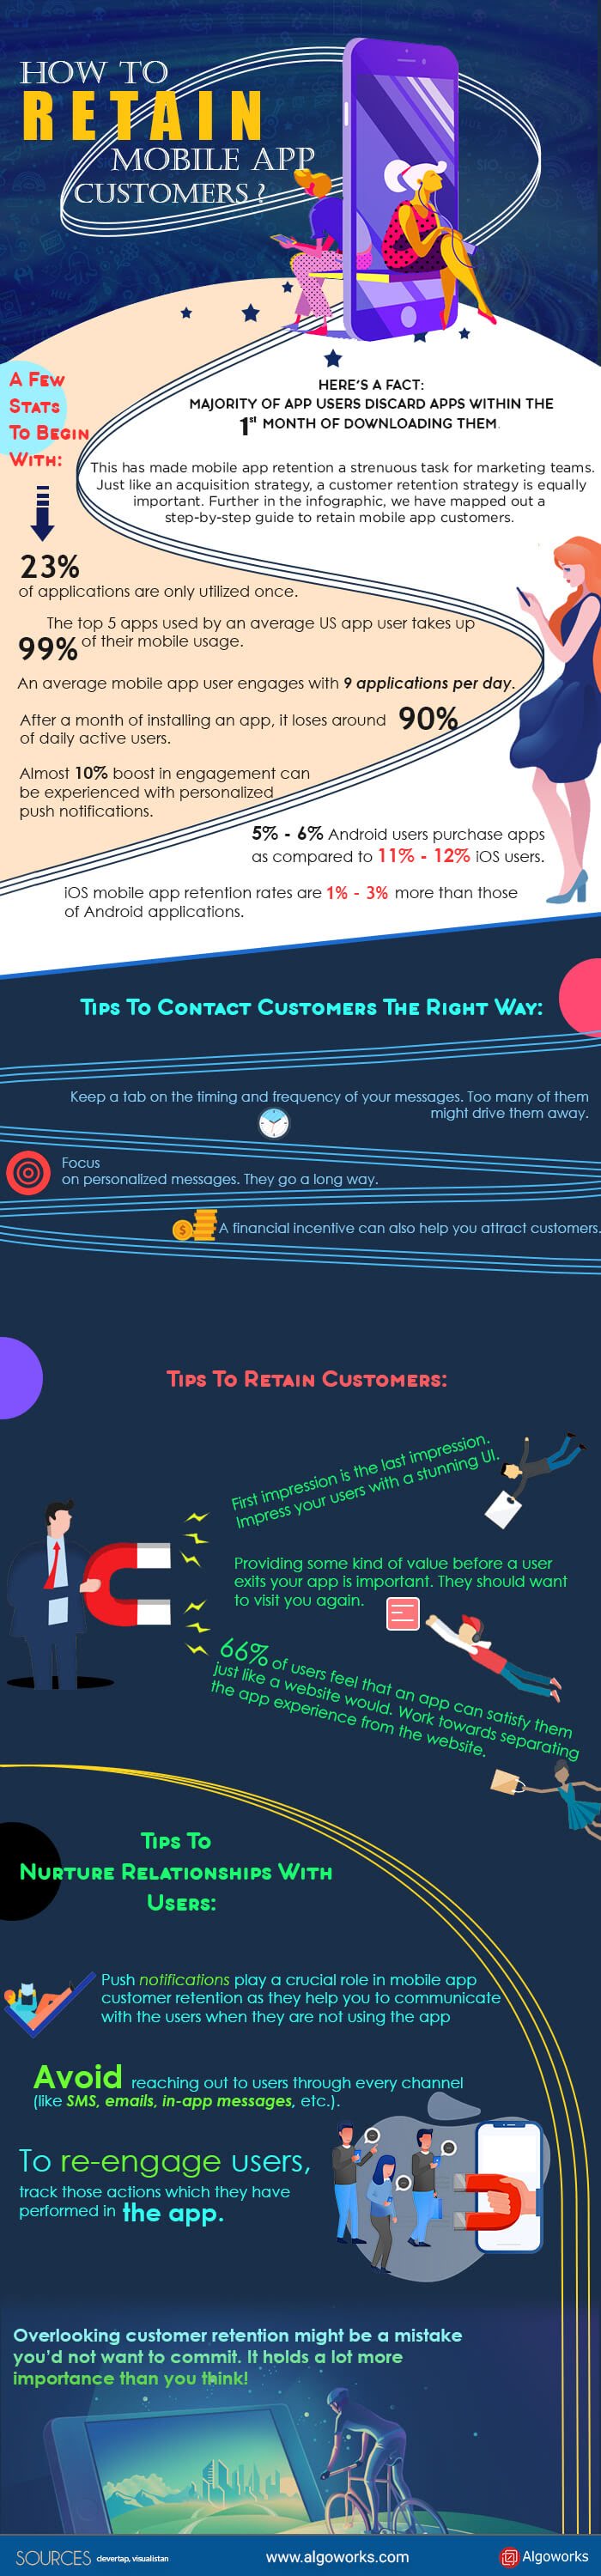 How To Retain Mobile App Customers #infographic